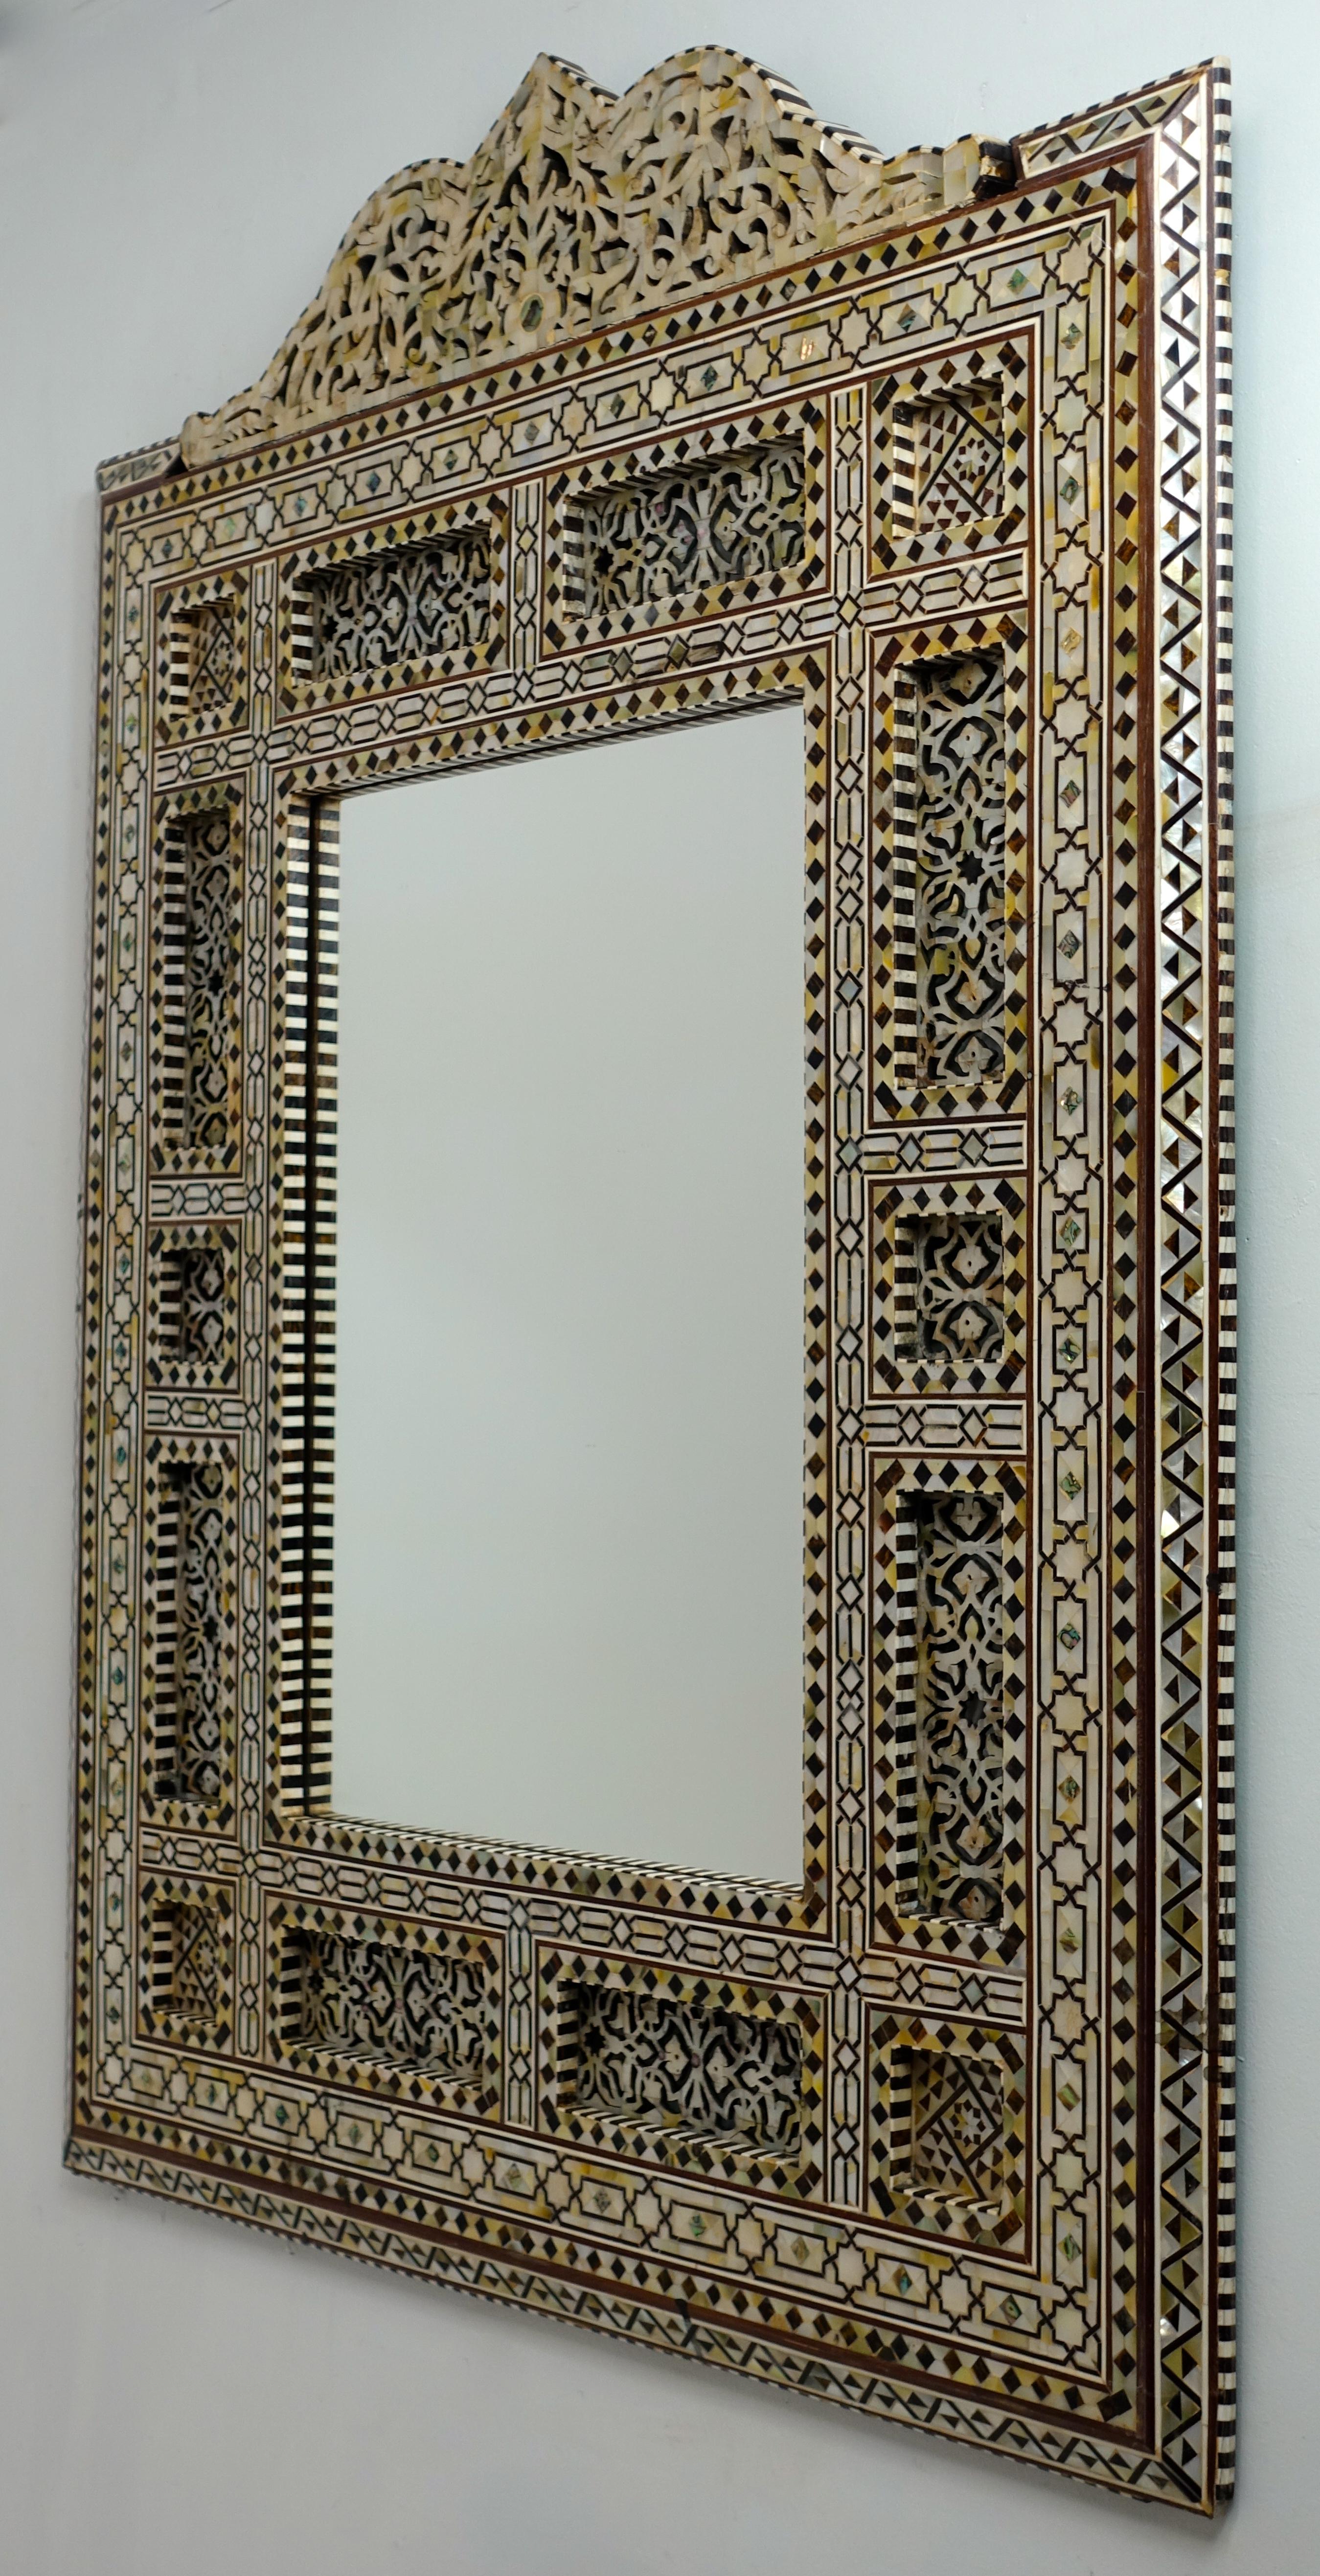 Elorborate Inlayed Syrian Frame with Mirror 8